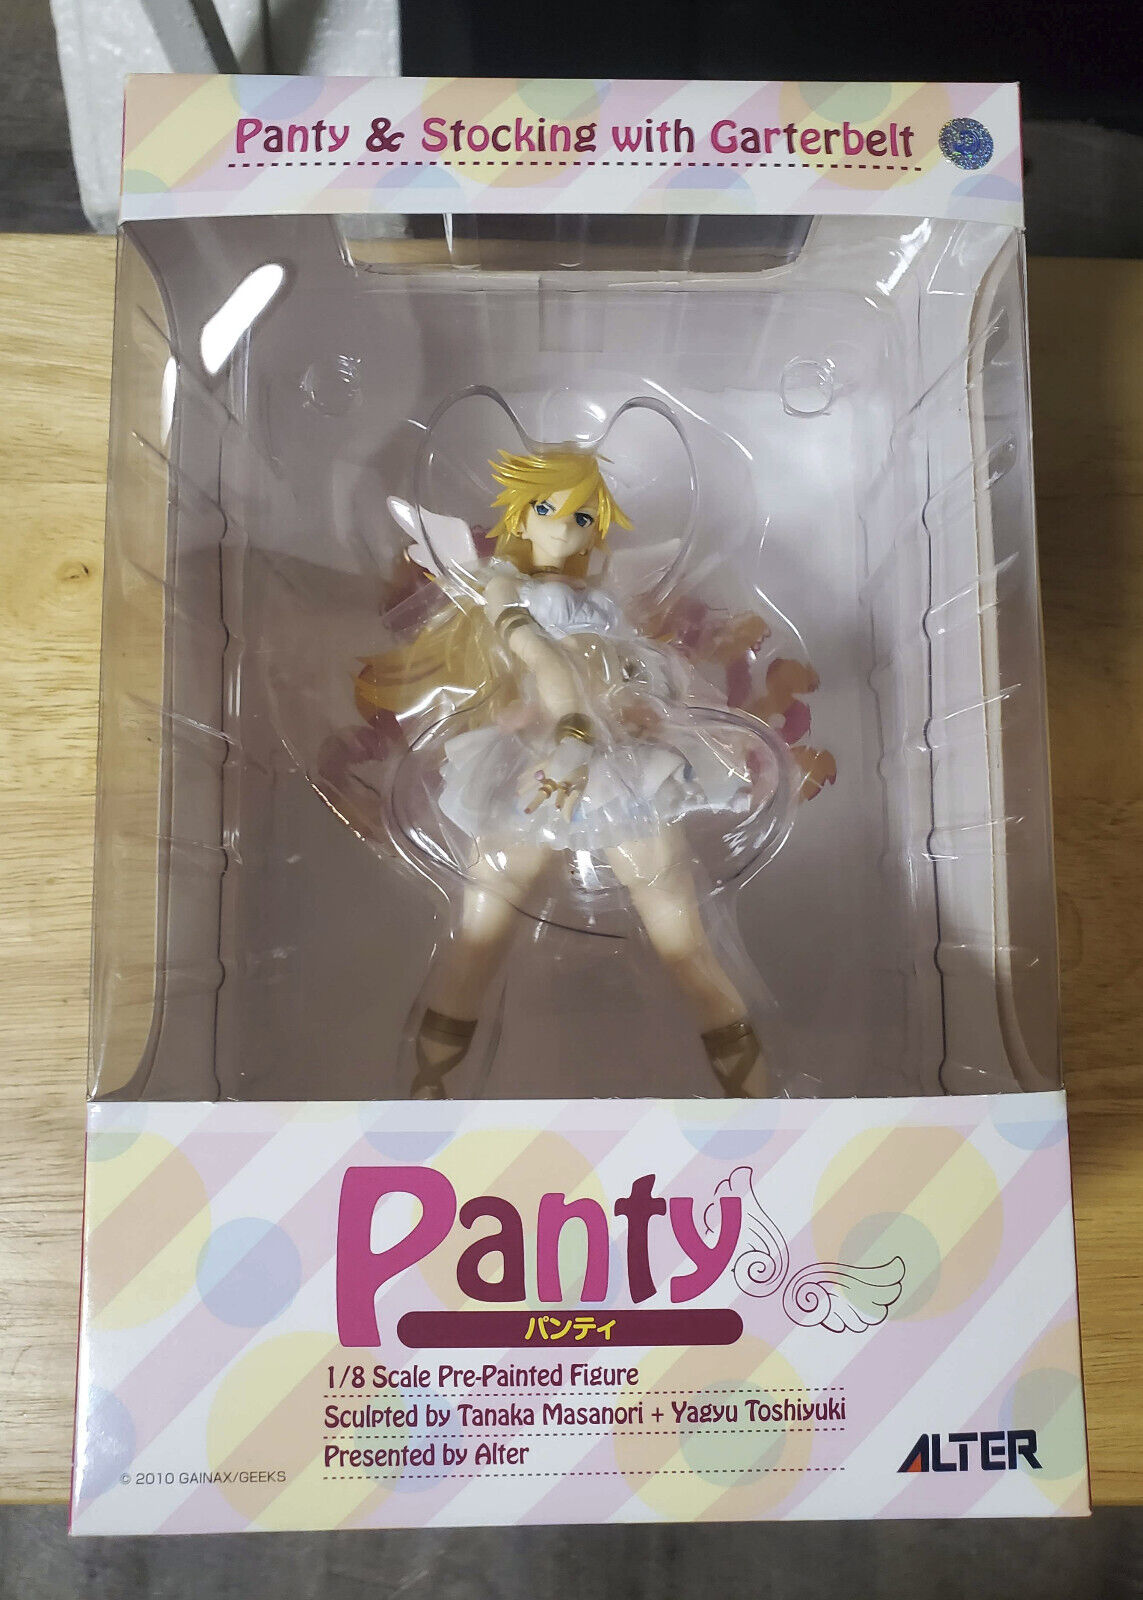 Panty & Stocking with Garterbelt - Panty 1/8 Figure by Alter